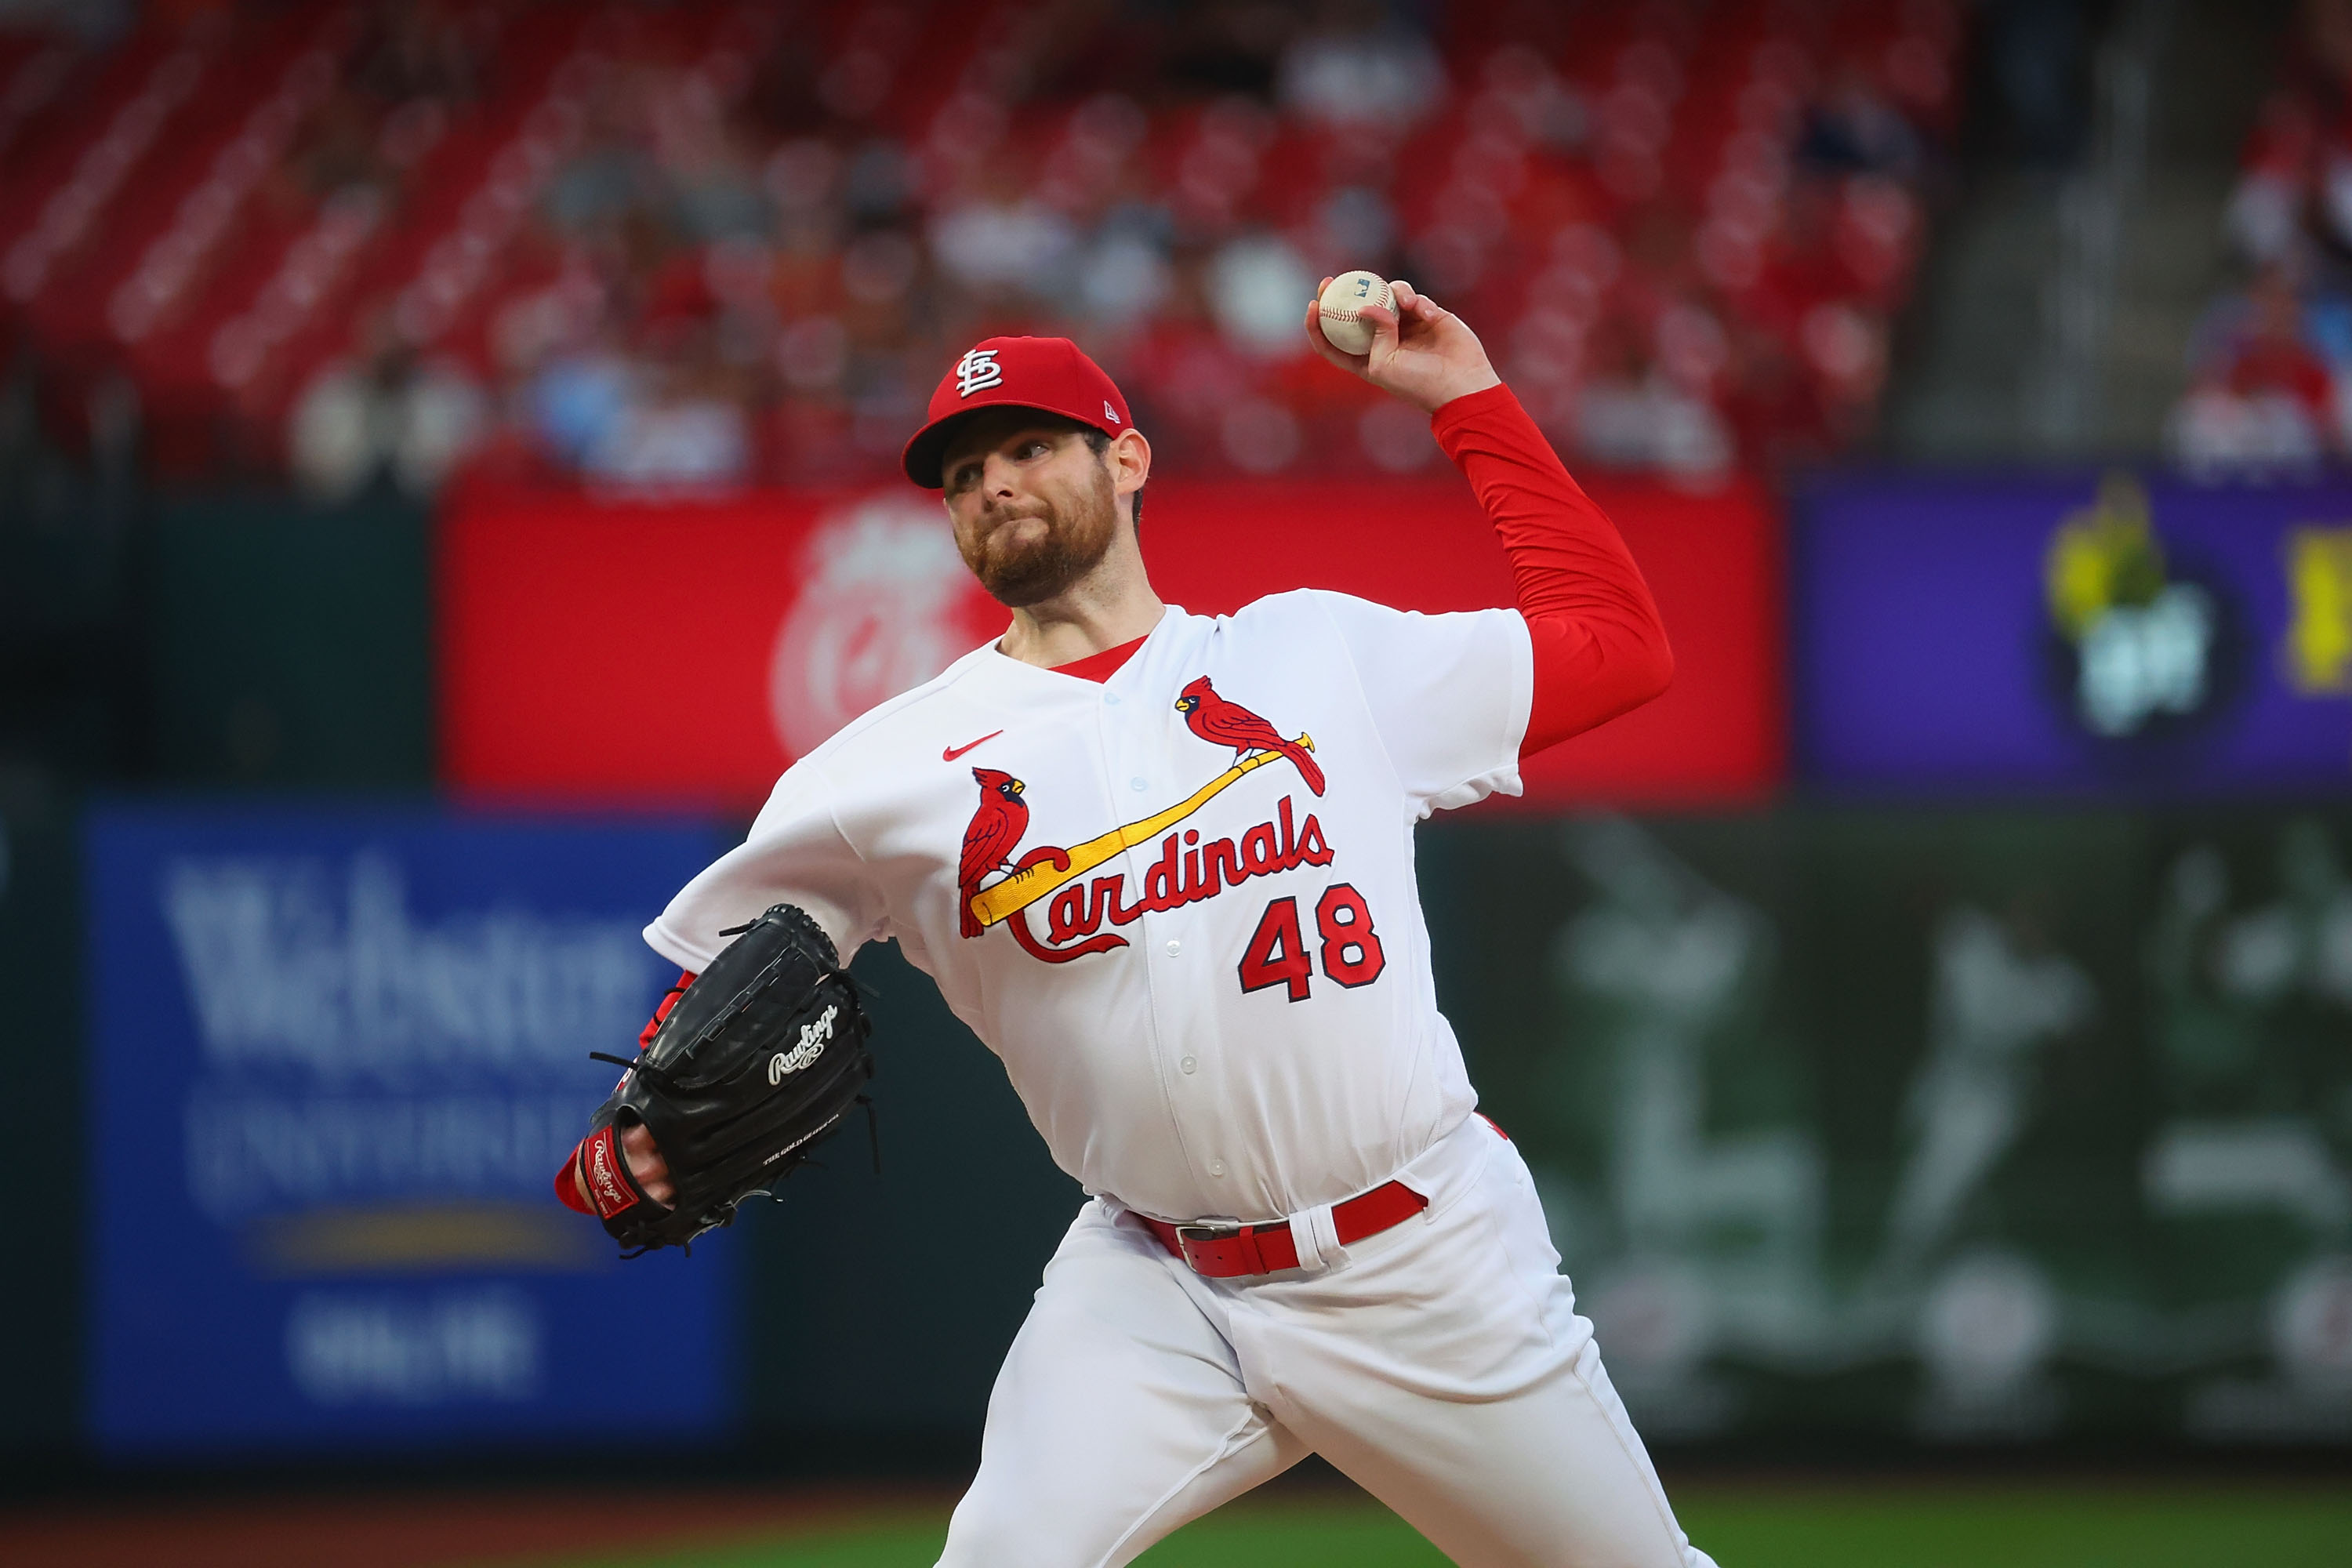 Yankees-Cardinals trade details: New York acquires outfielder Harrison Bader  for starting pitcher Jordan Montgomery